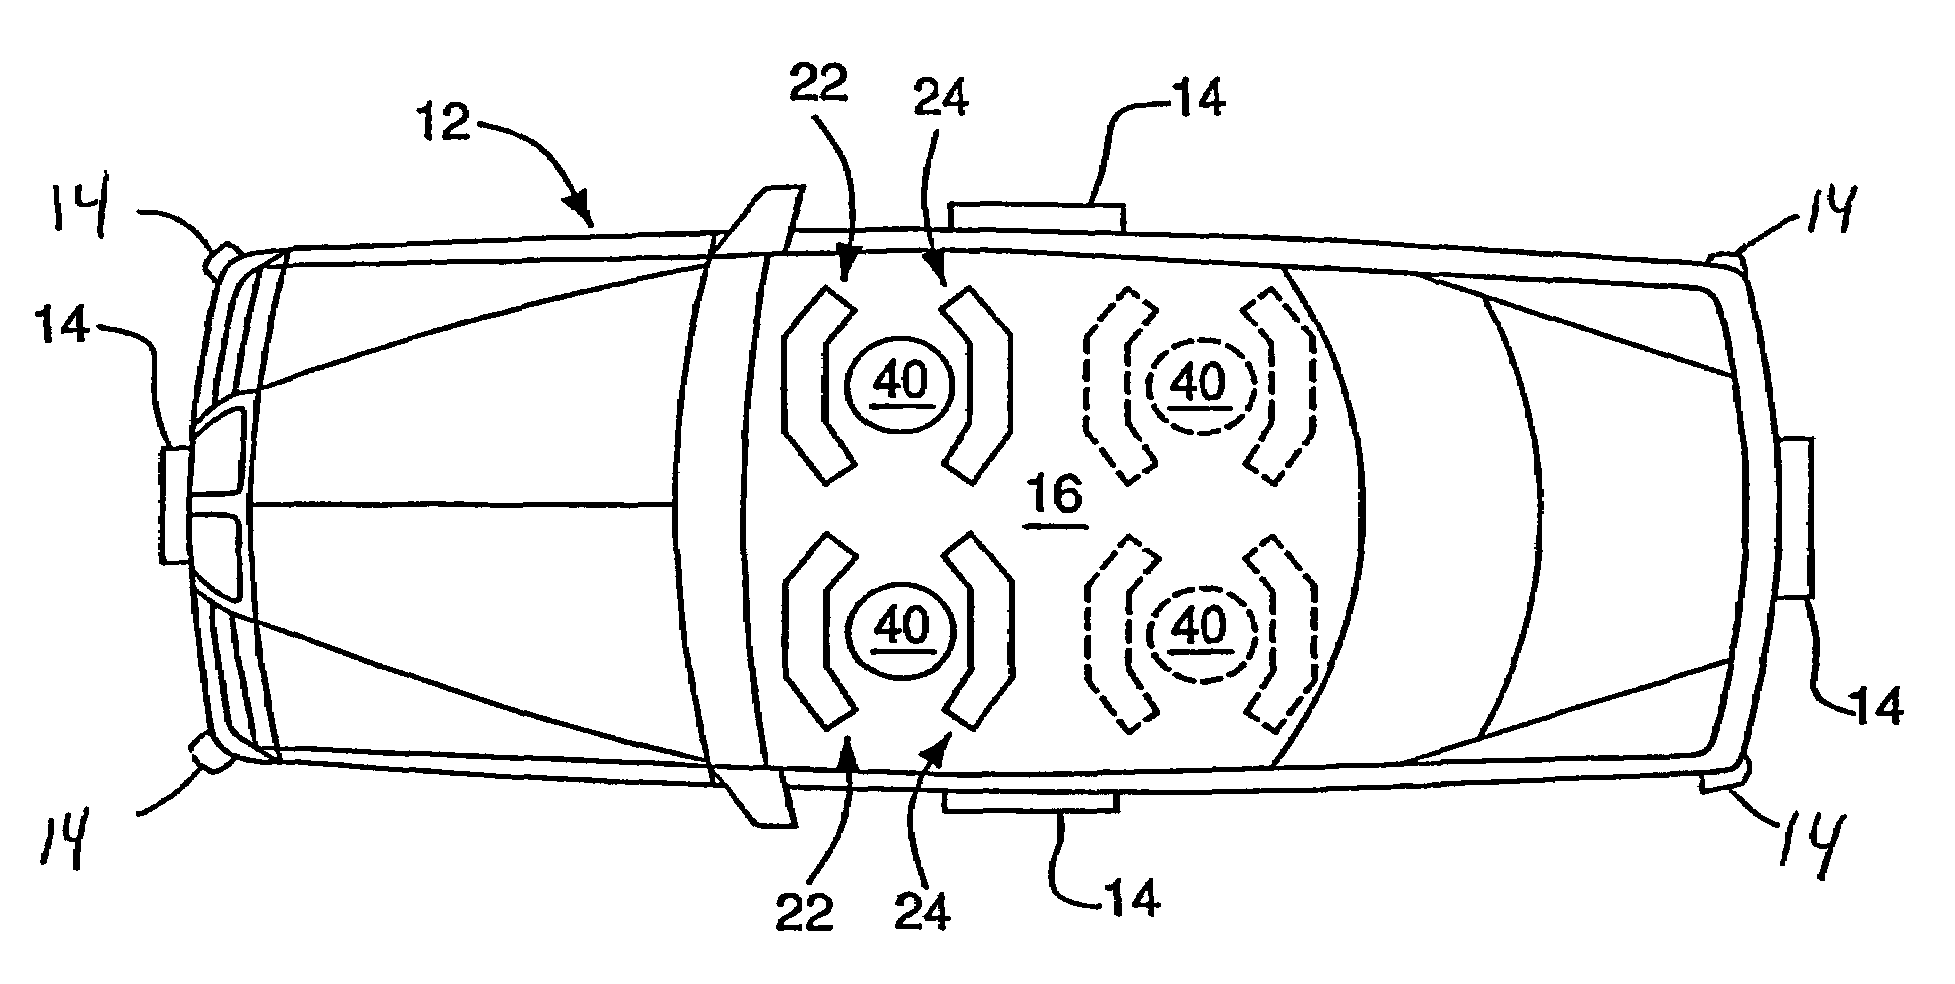 Inflatable restraint assembly for vehicles